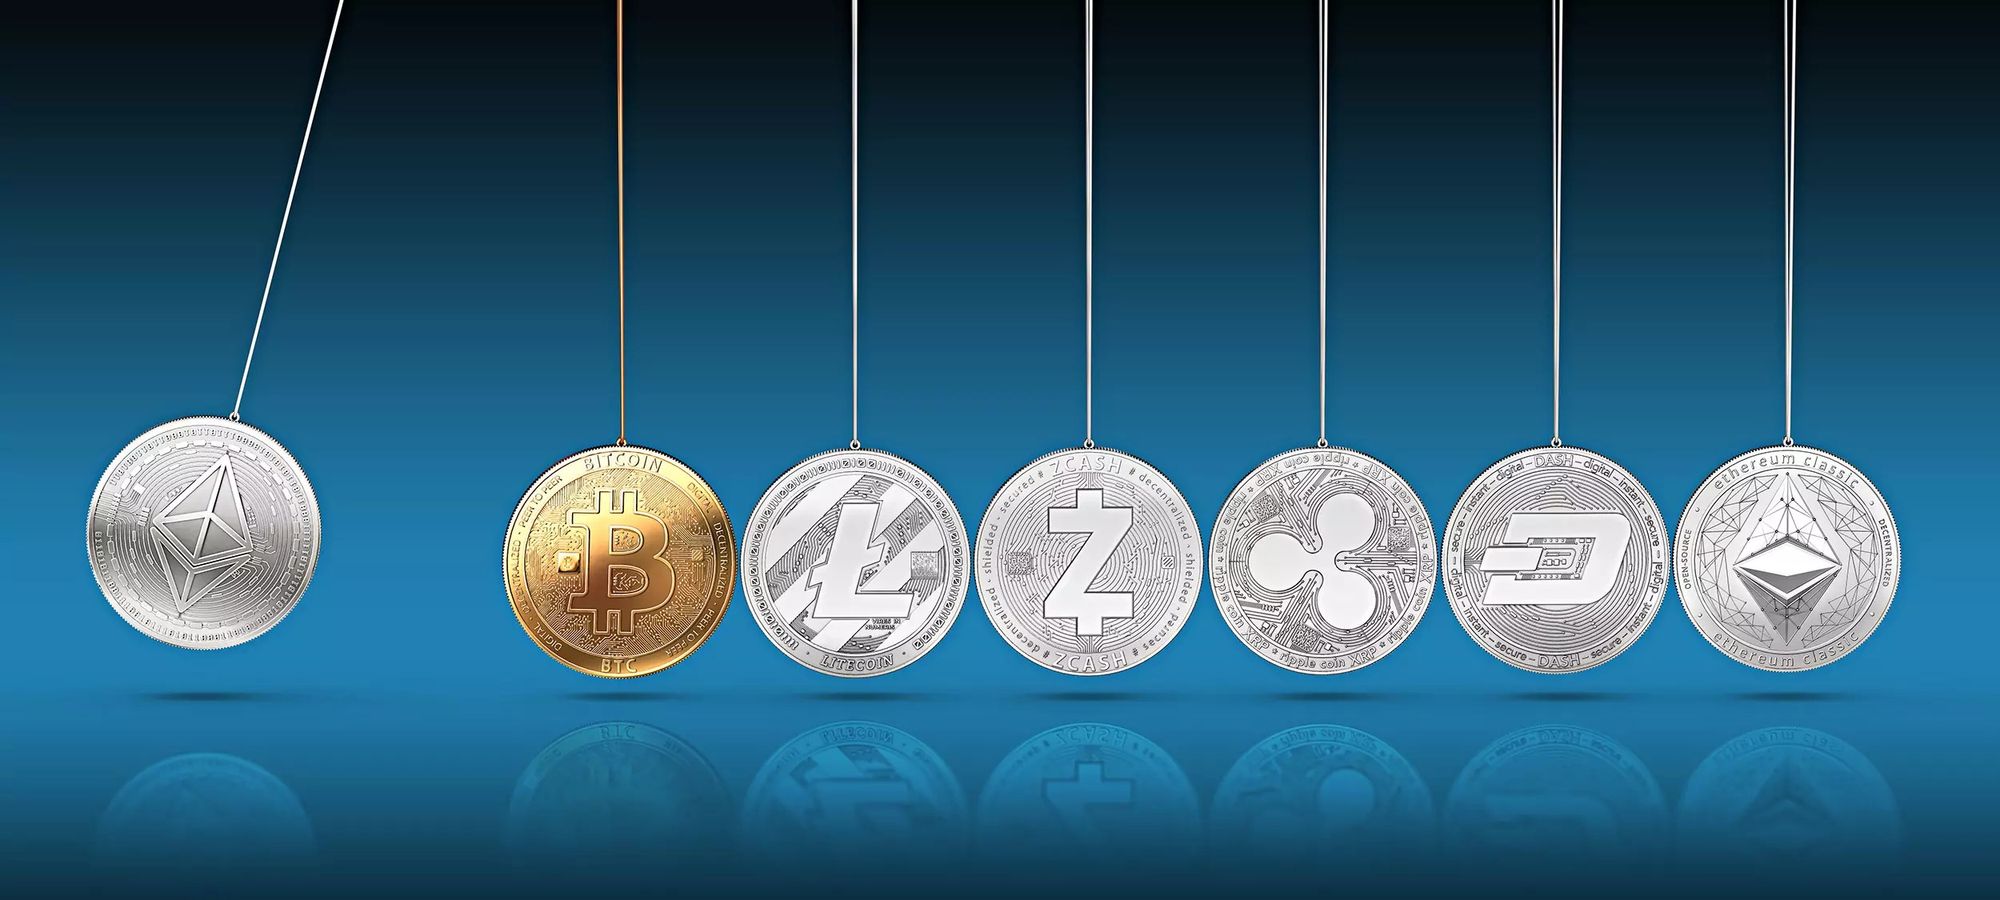 Beyond Bitcoin: 7 of the Top Trending Cryptocurrencies